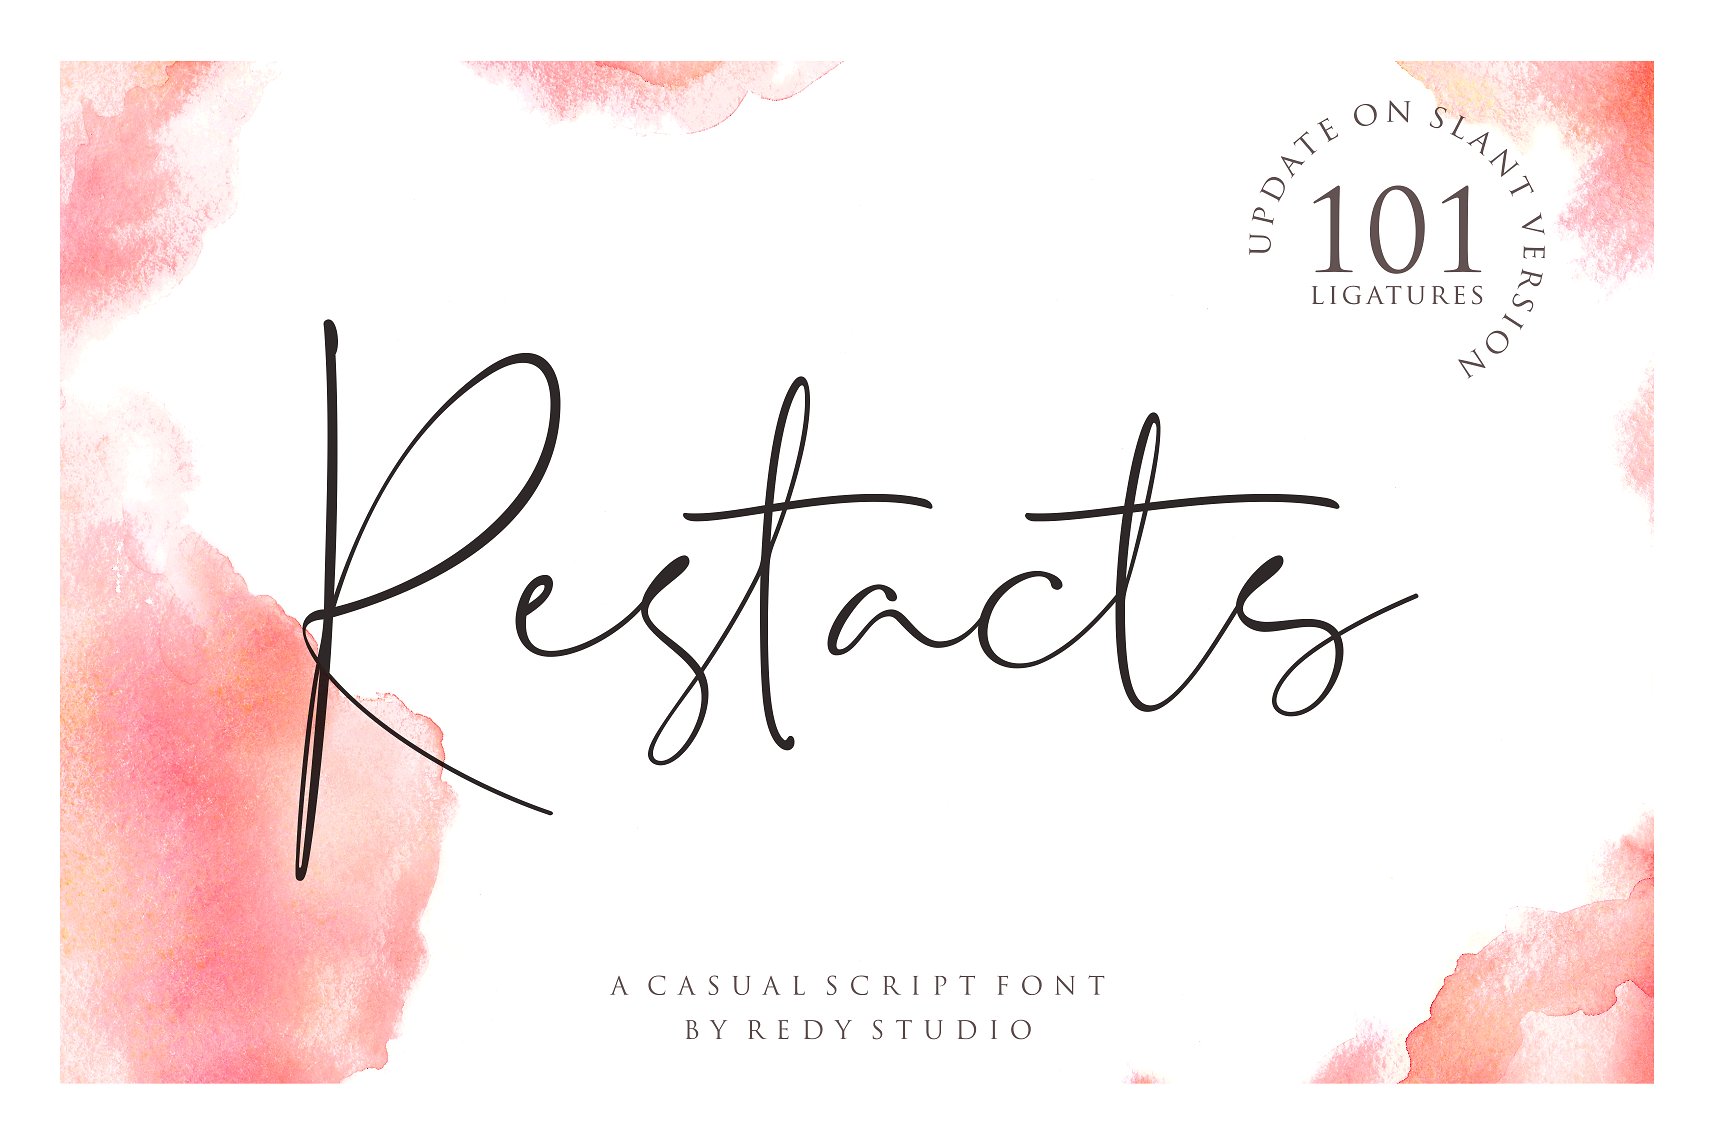 Restacts DEMO font